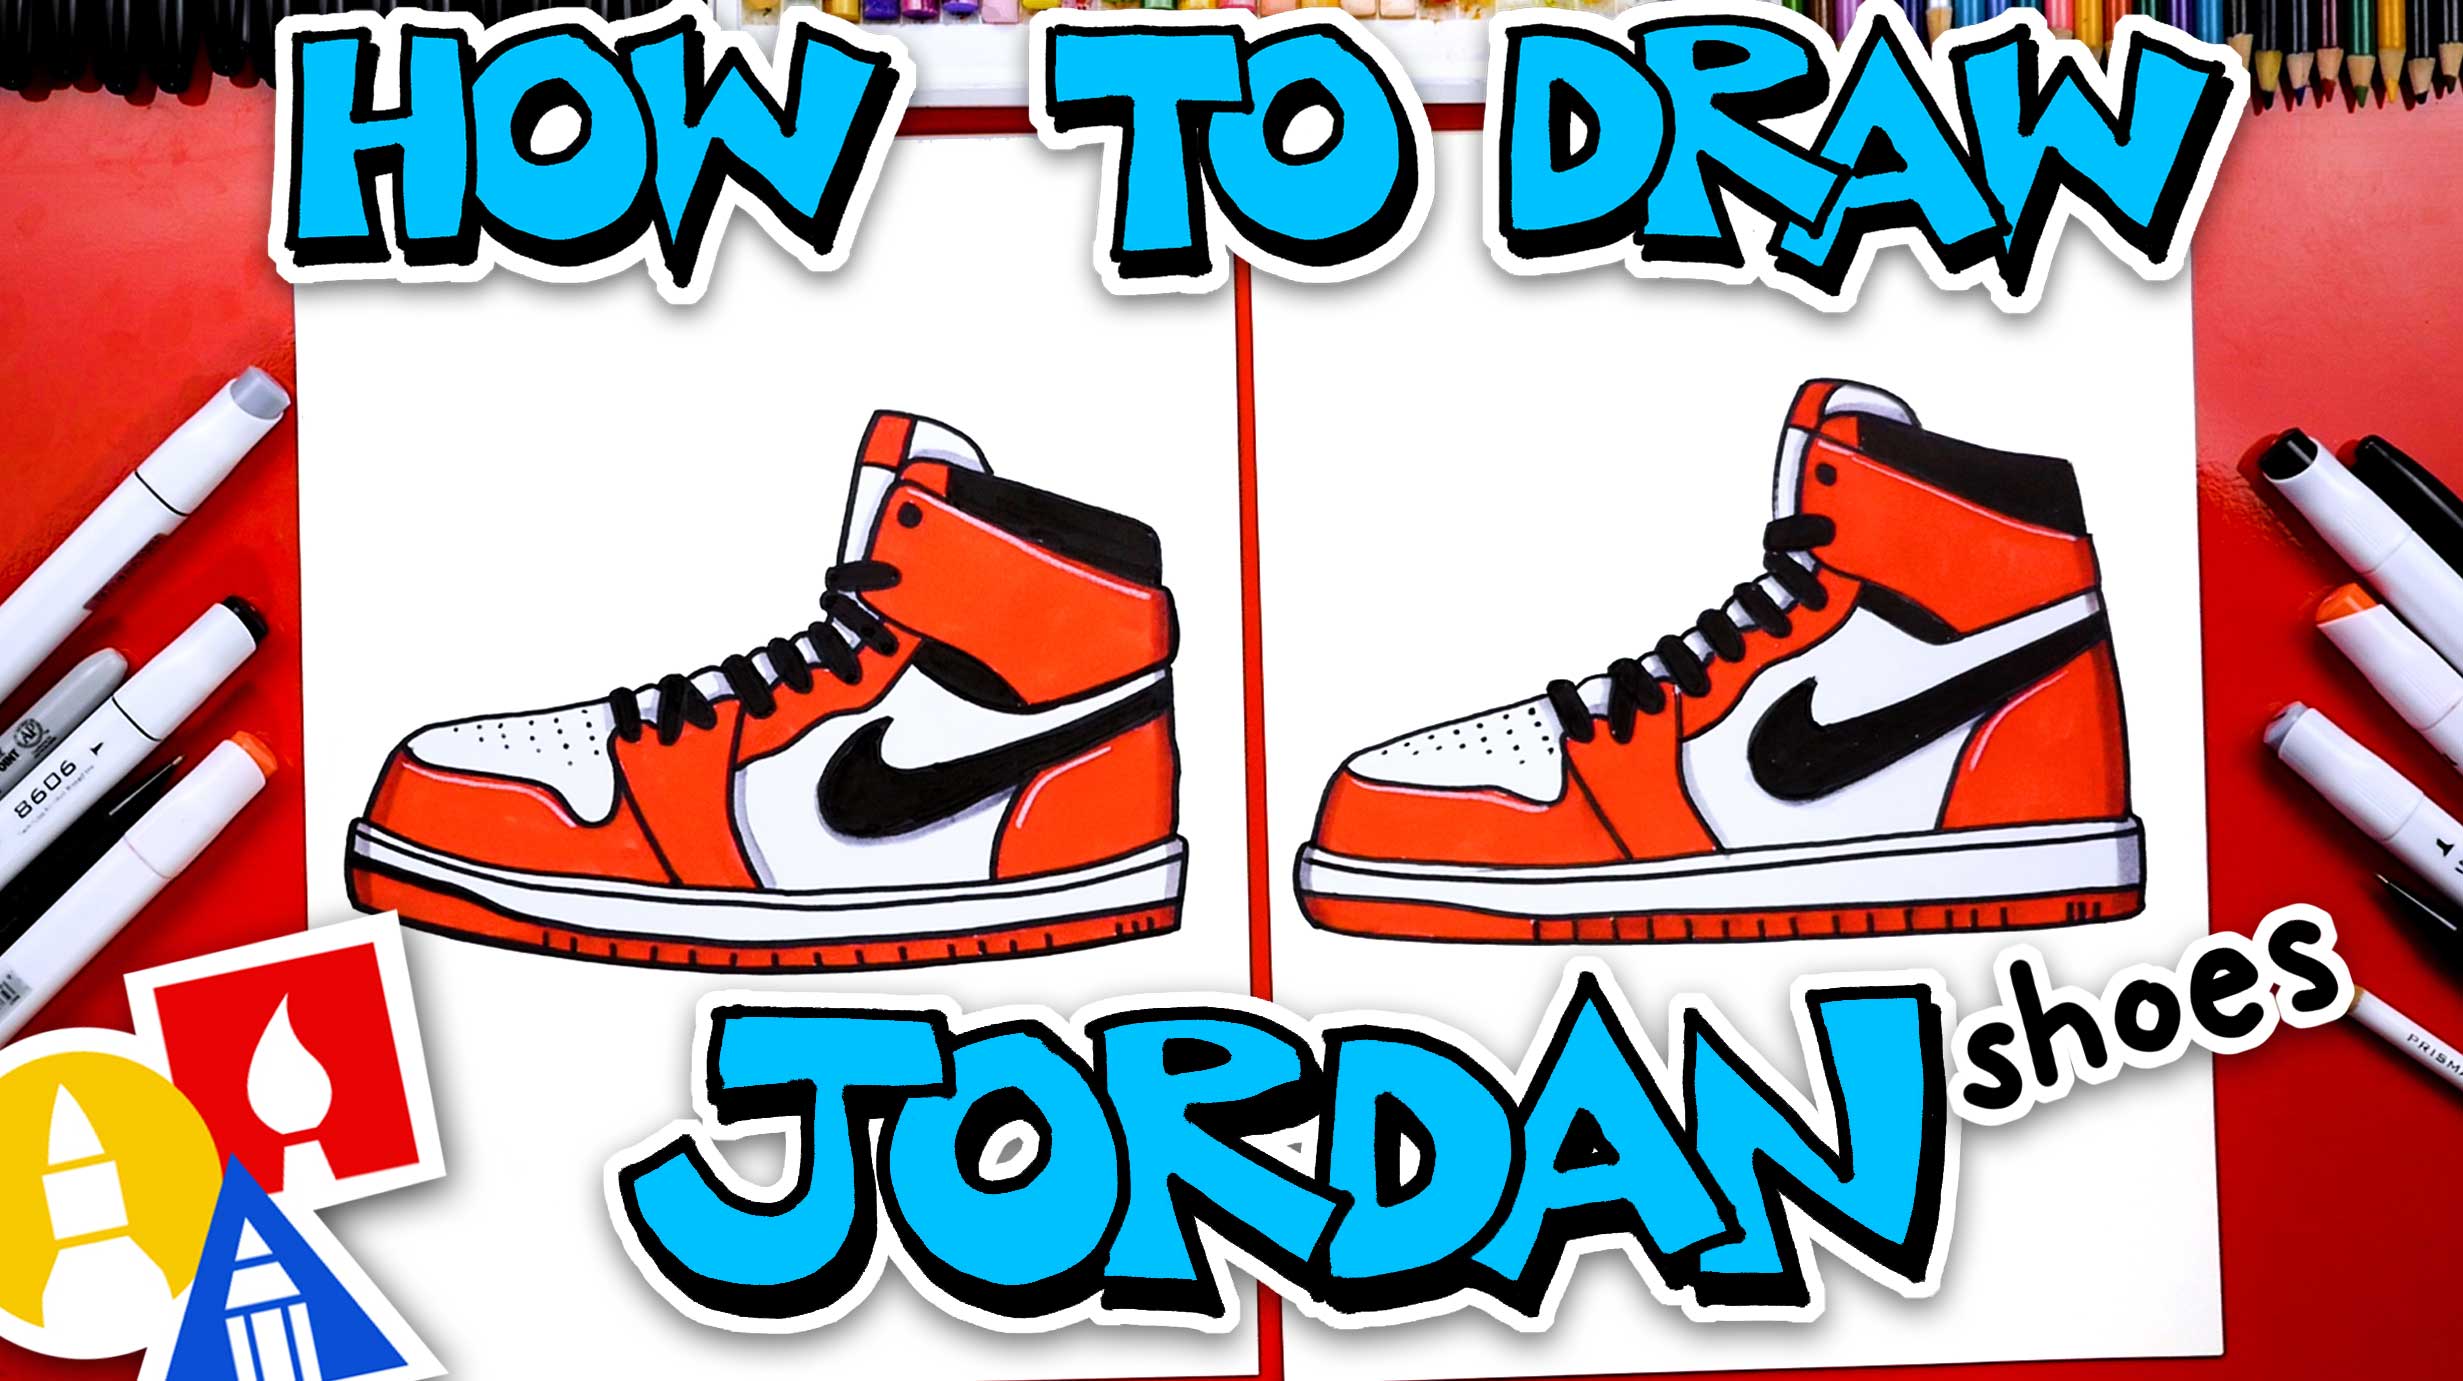 How To Draw A Shoe (Air Jordan 1) vlr.eng.br